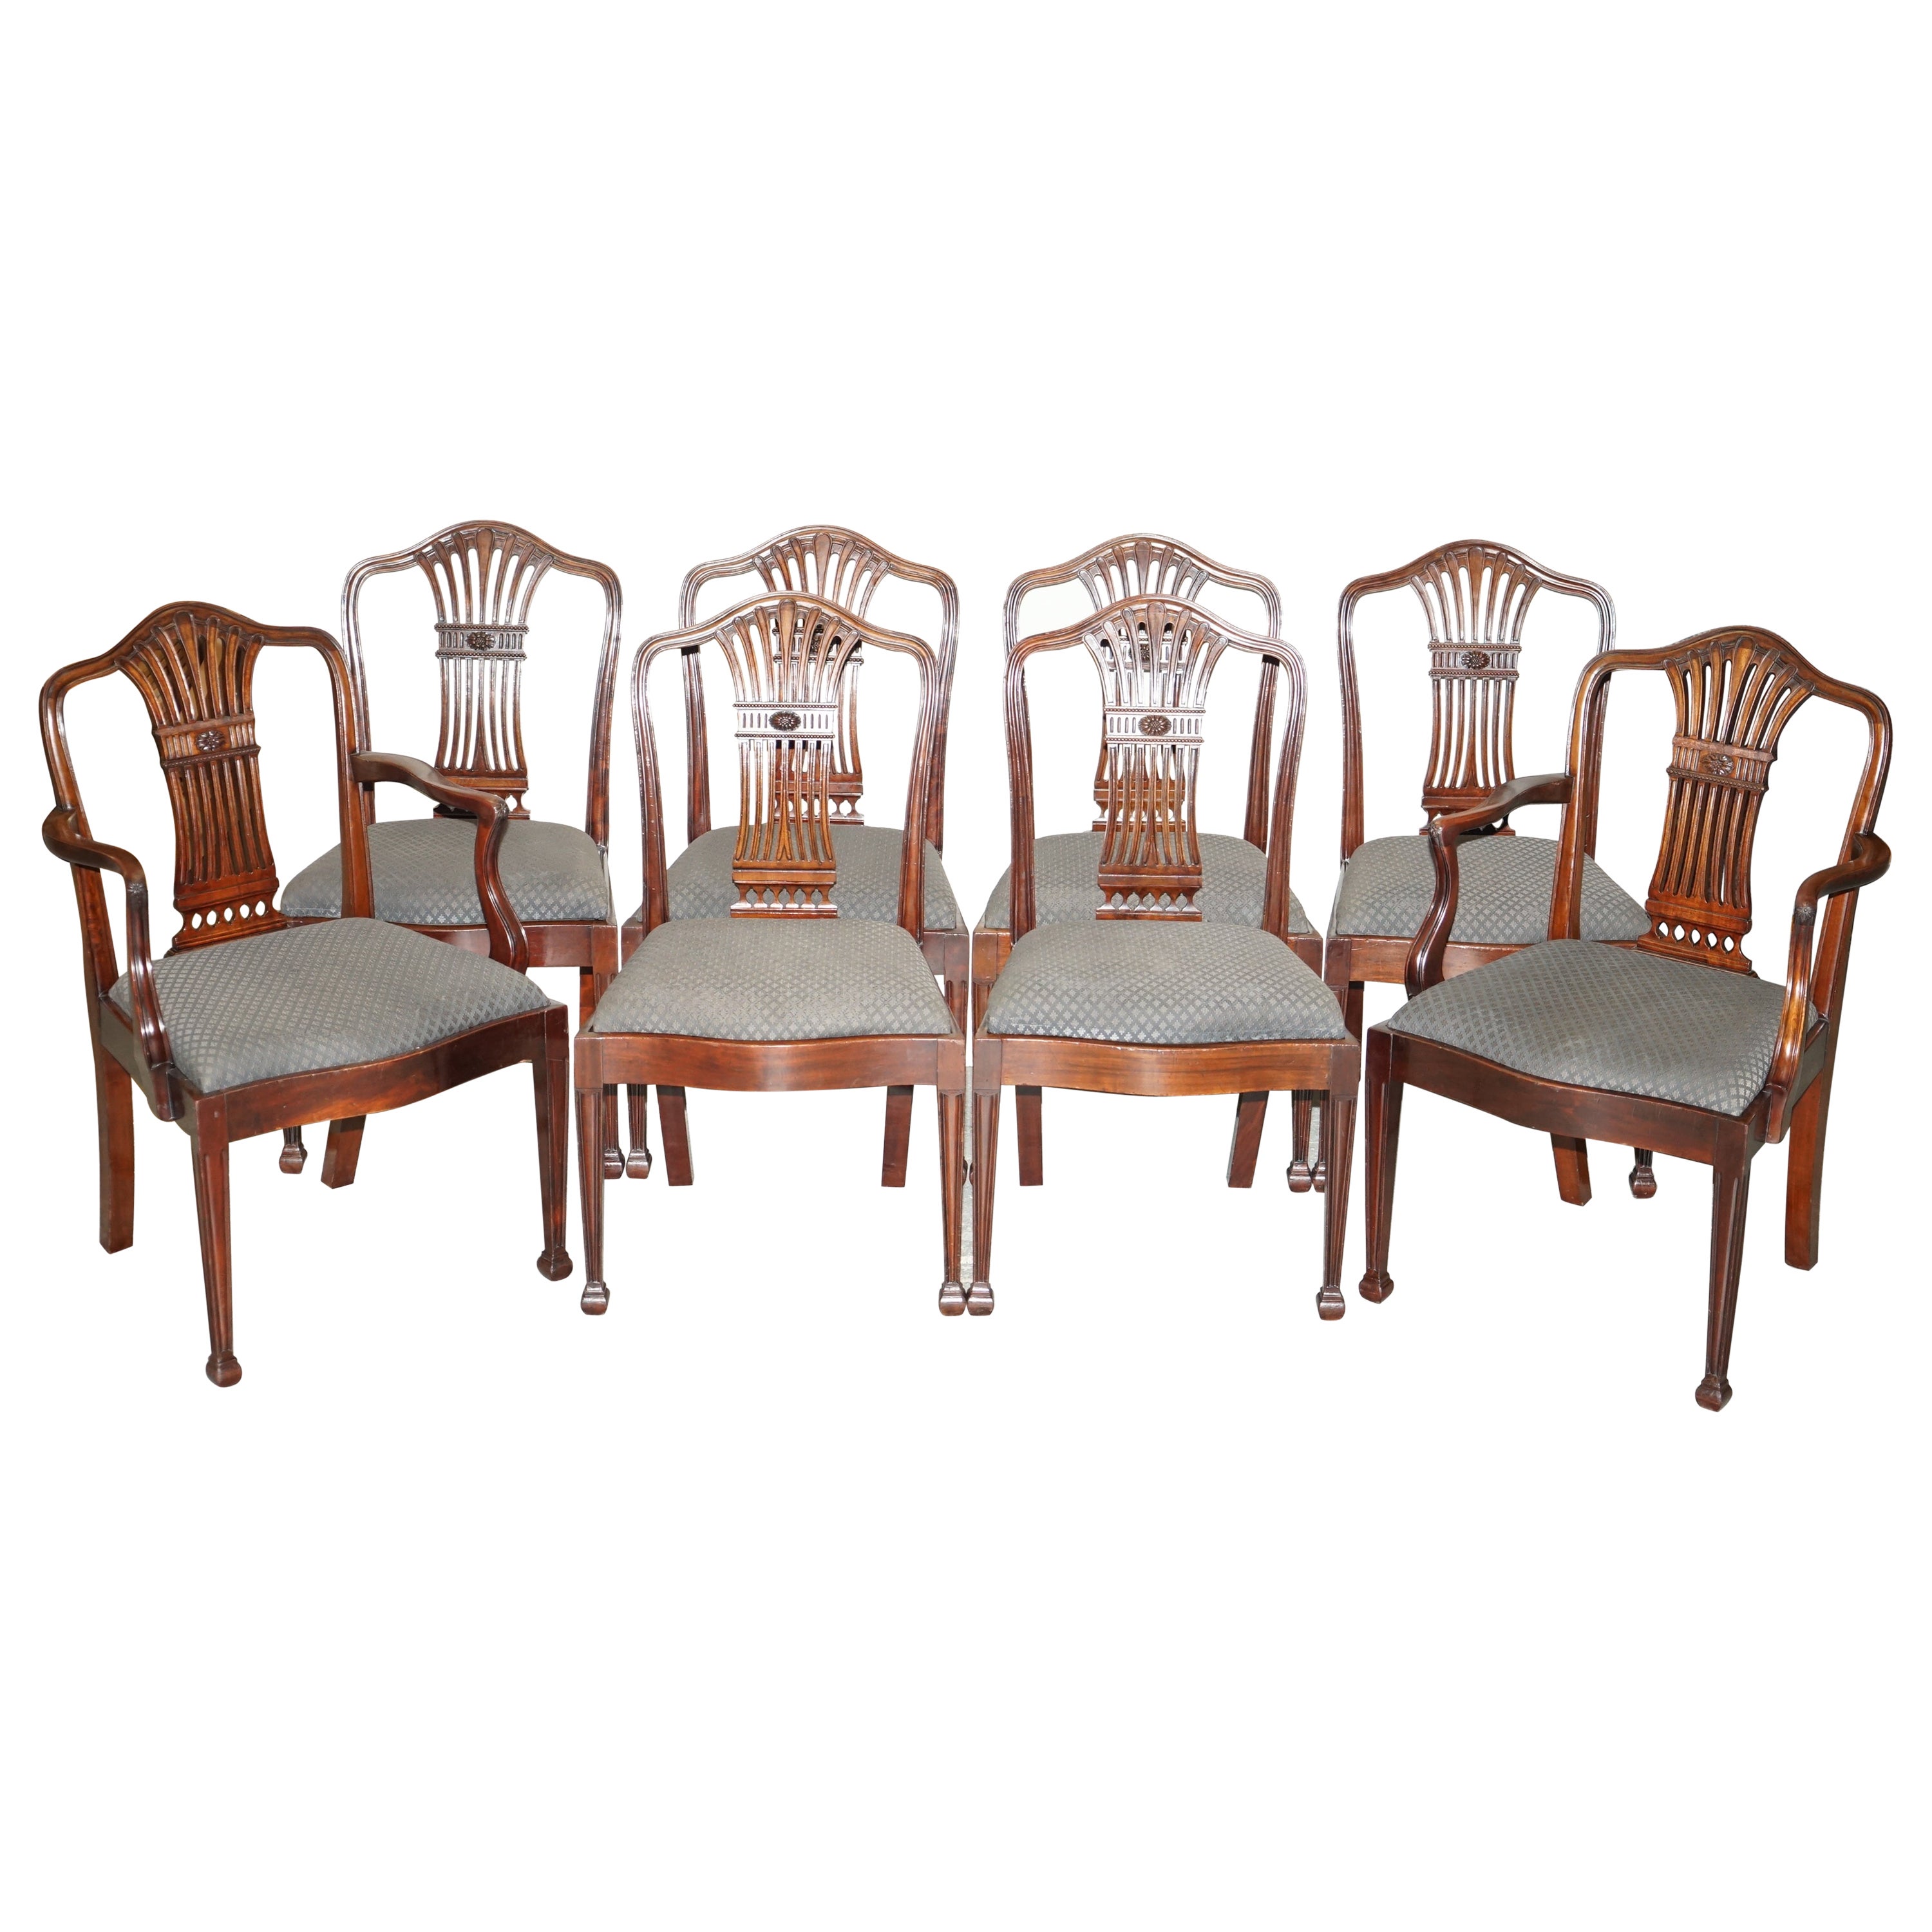 8 Antique George Hepplewhite Style Dining Chairs from Lady Diana's Spencer House For Sale